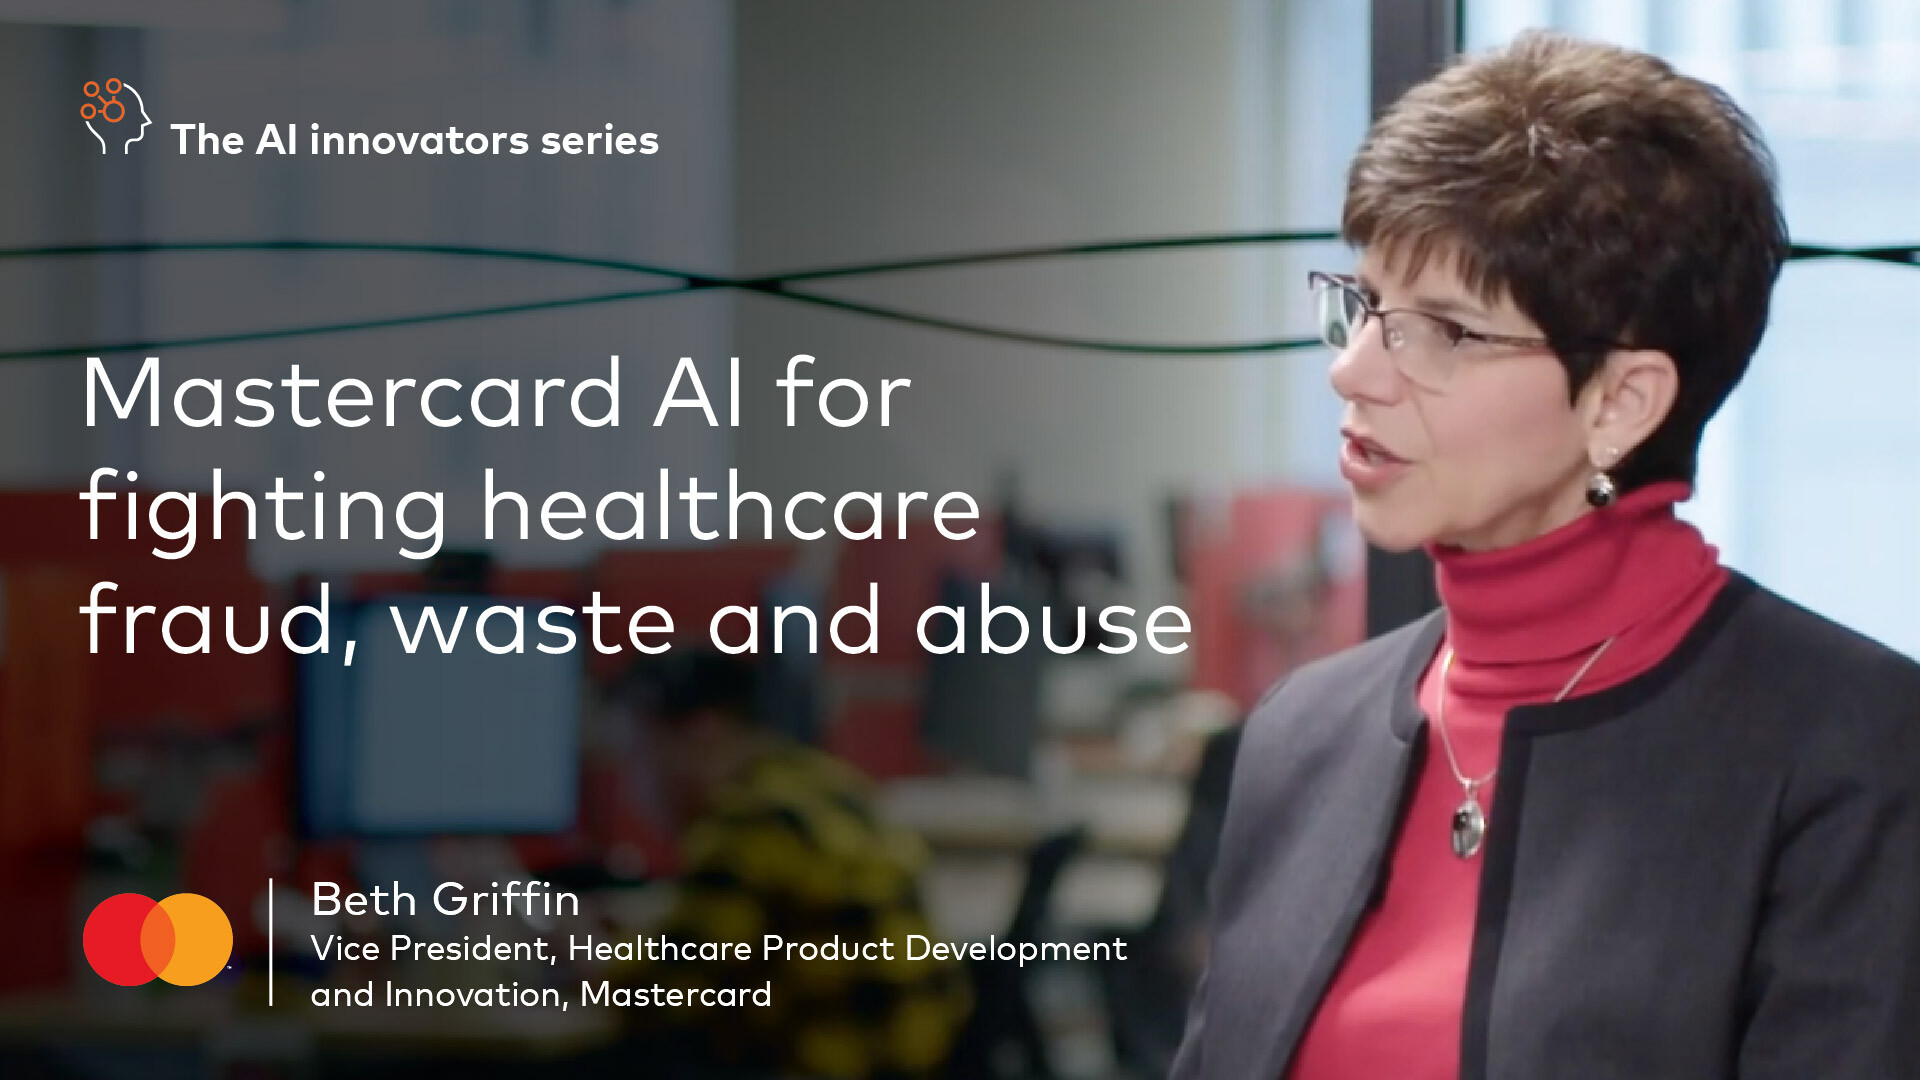 Mastercard AI for fighting healthcare fraud, waste and abuse